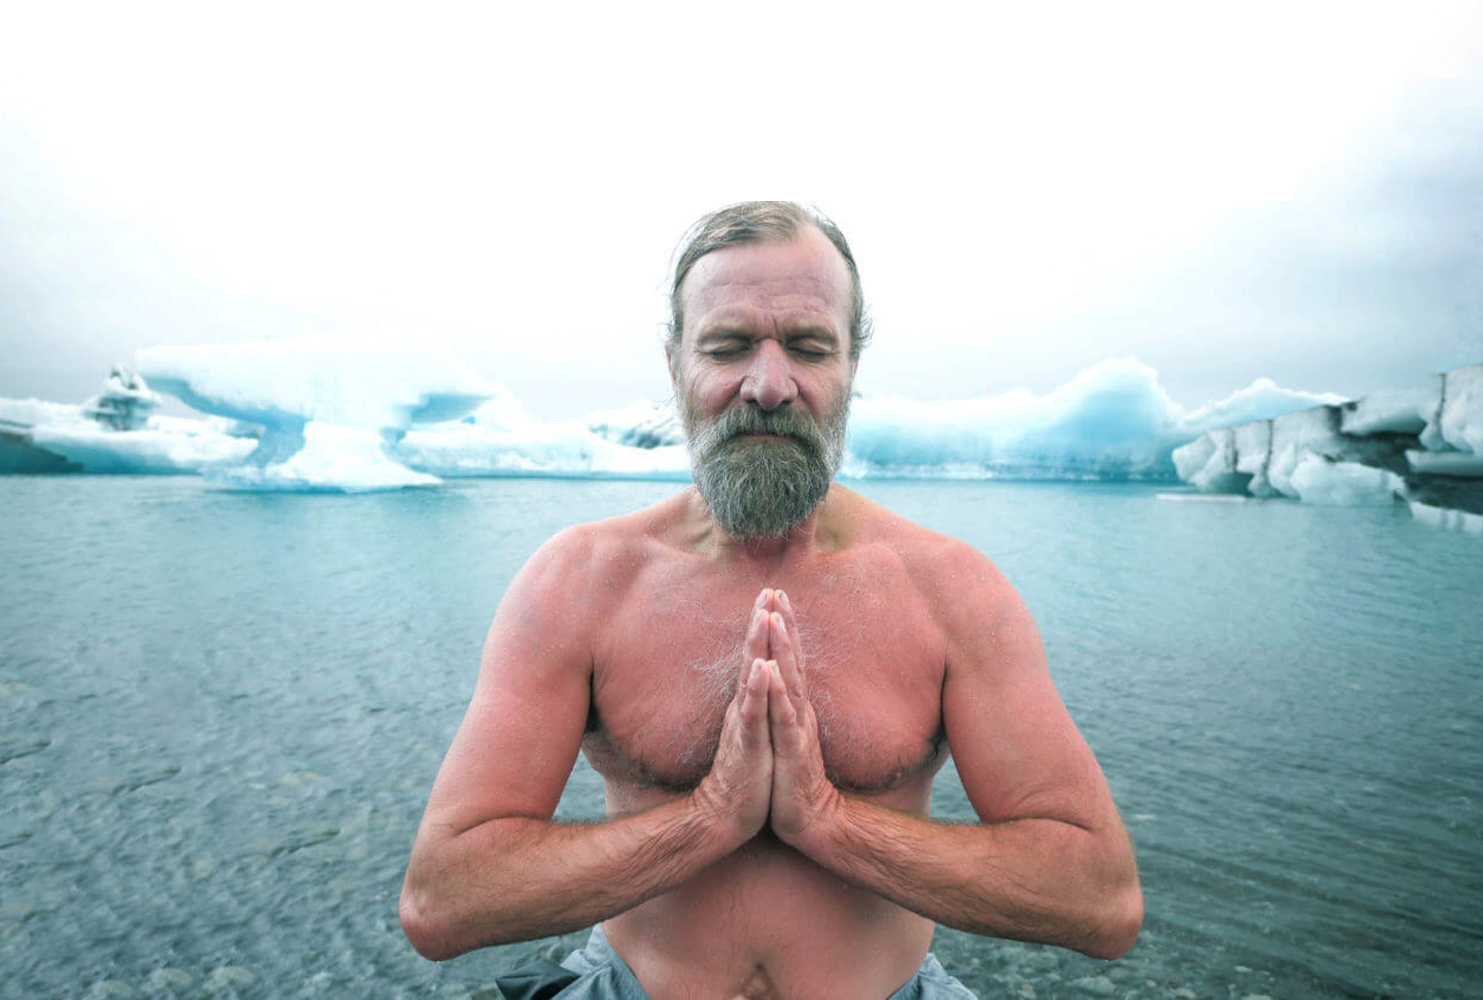 The Siren's Call: Unraveling the Watery Risks of the Wim Hof